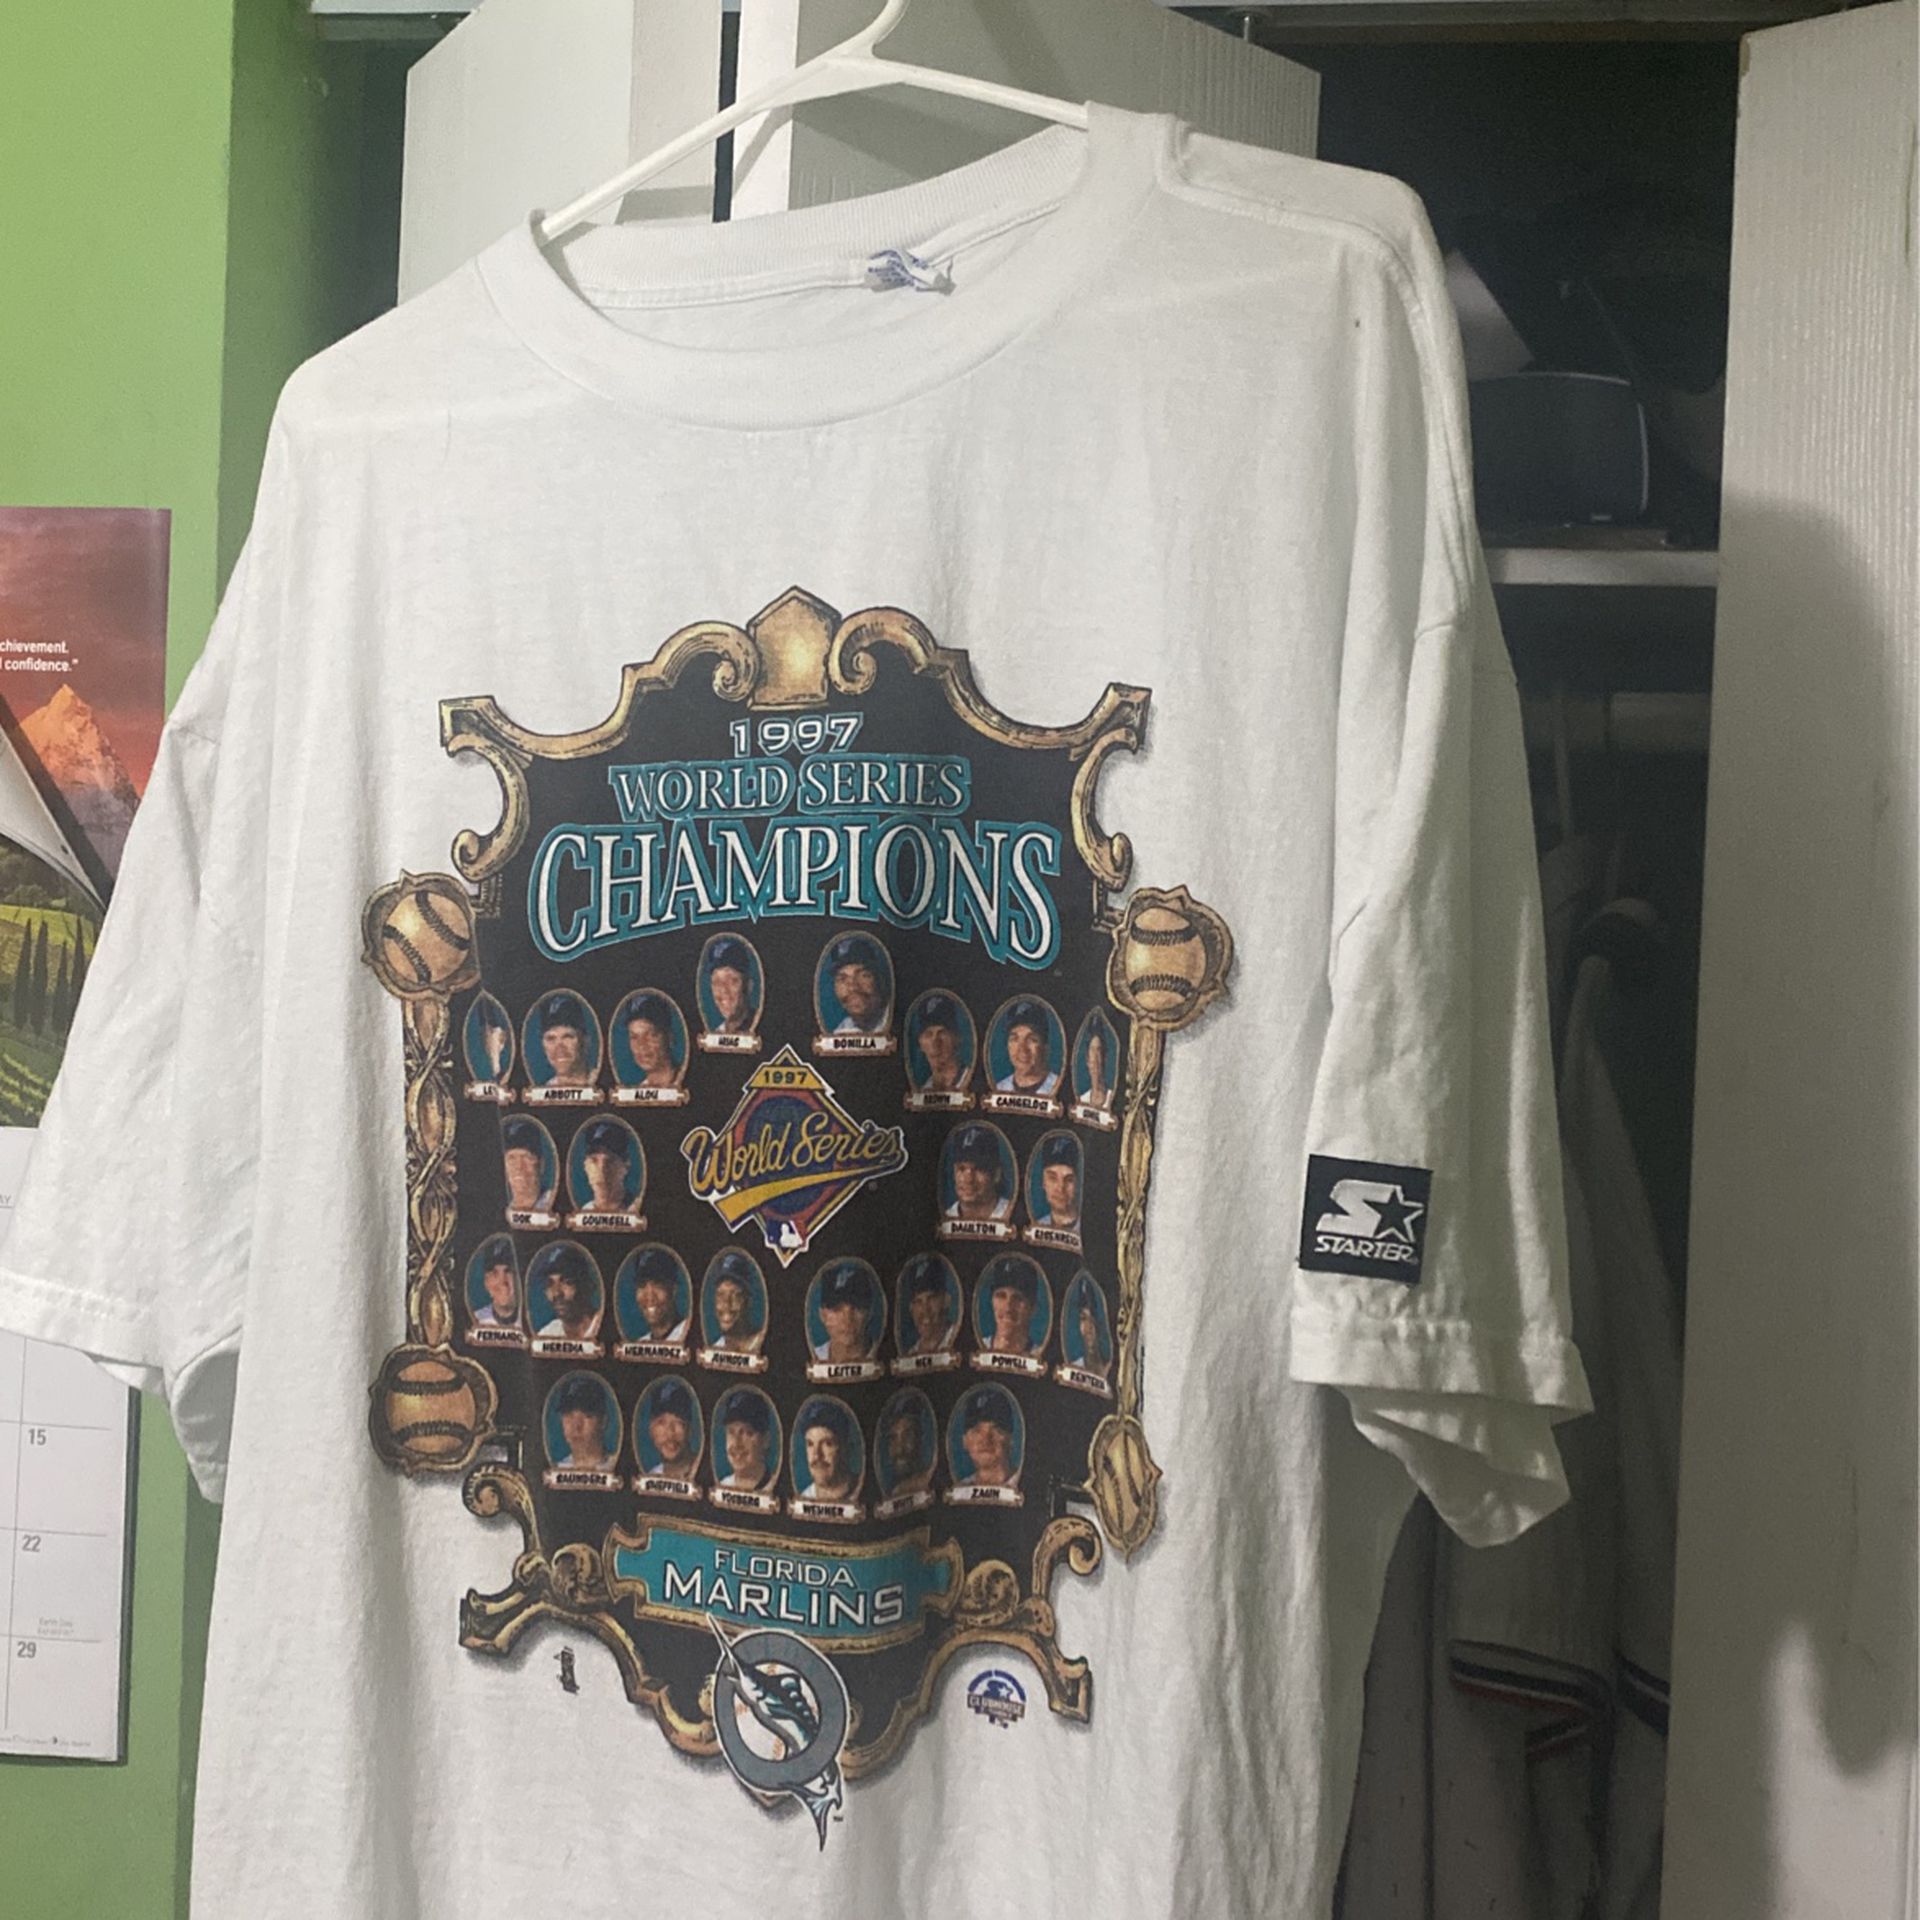 Florida Marlins 1997 World Series Championship T-Shirt for Sale in Miami,  FL - OfferUp